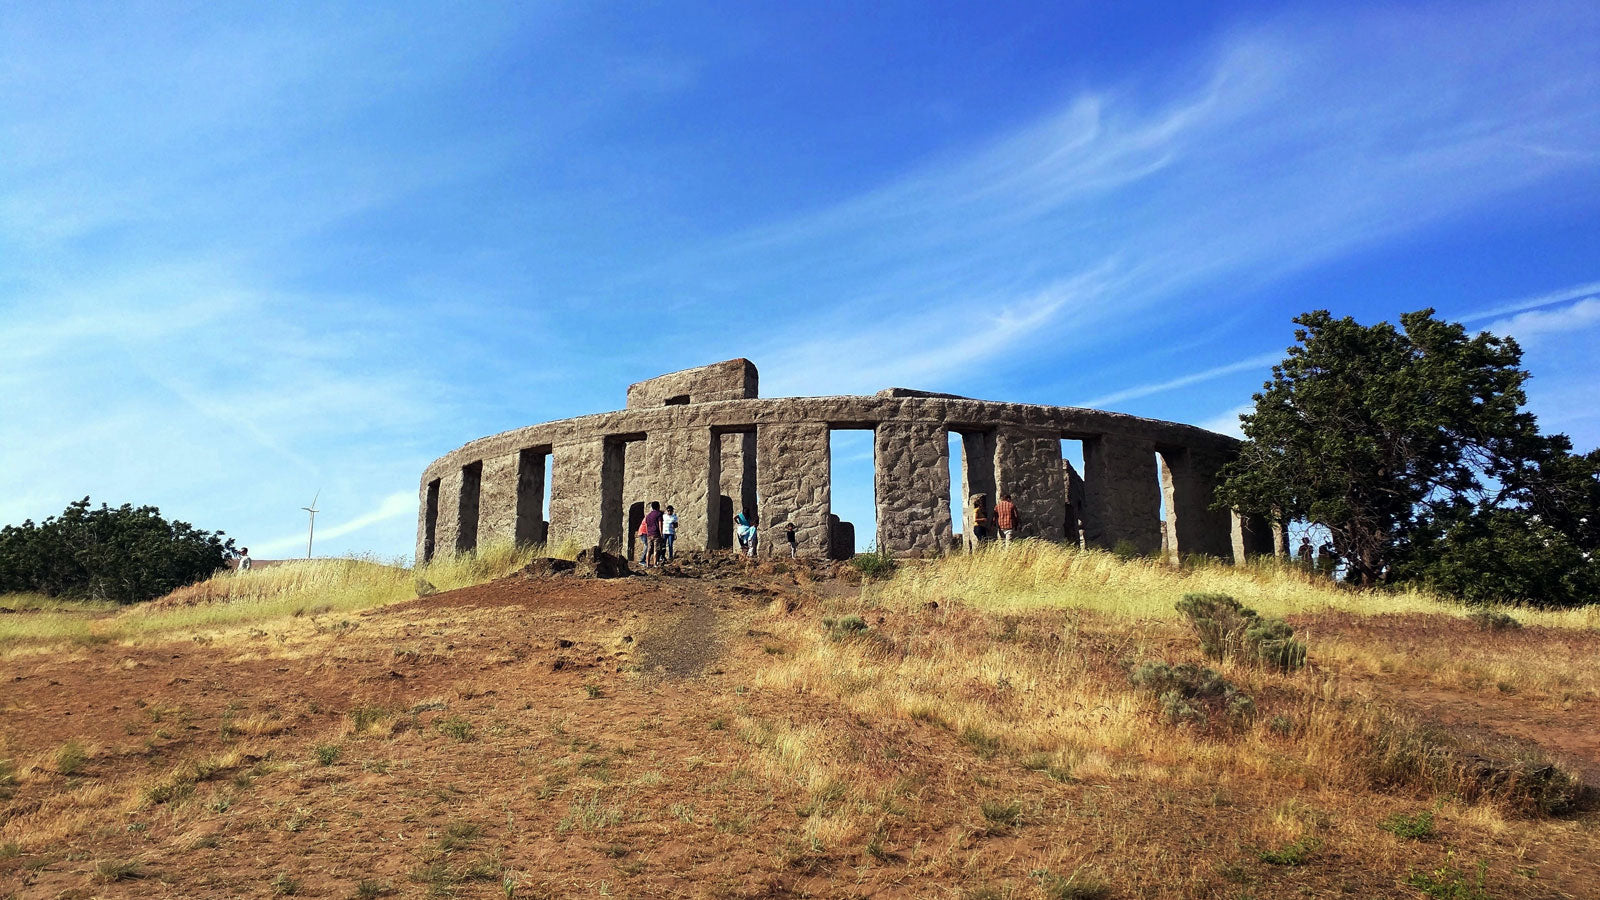 Six Little Known Attractions in Washington State - Maryhill Stonehenge